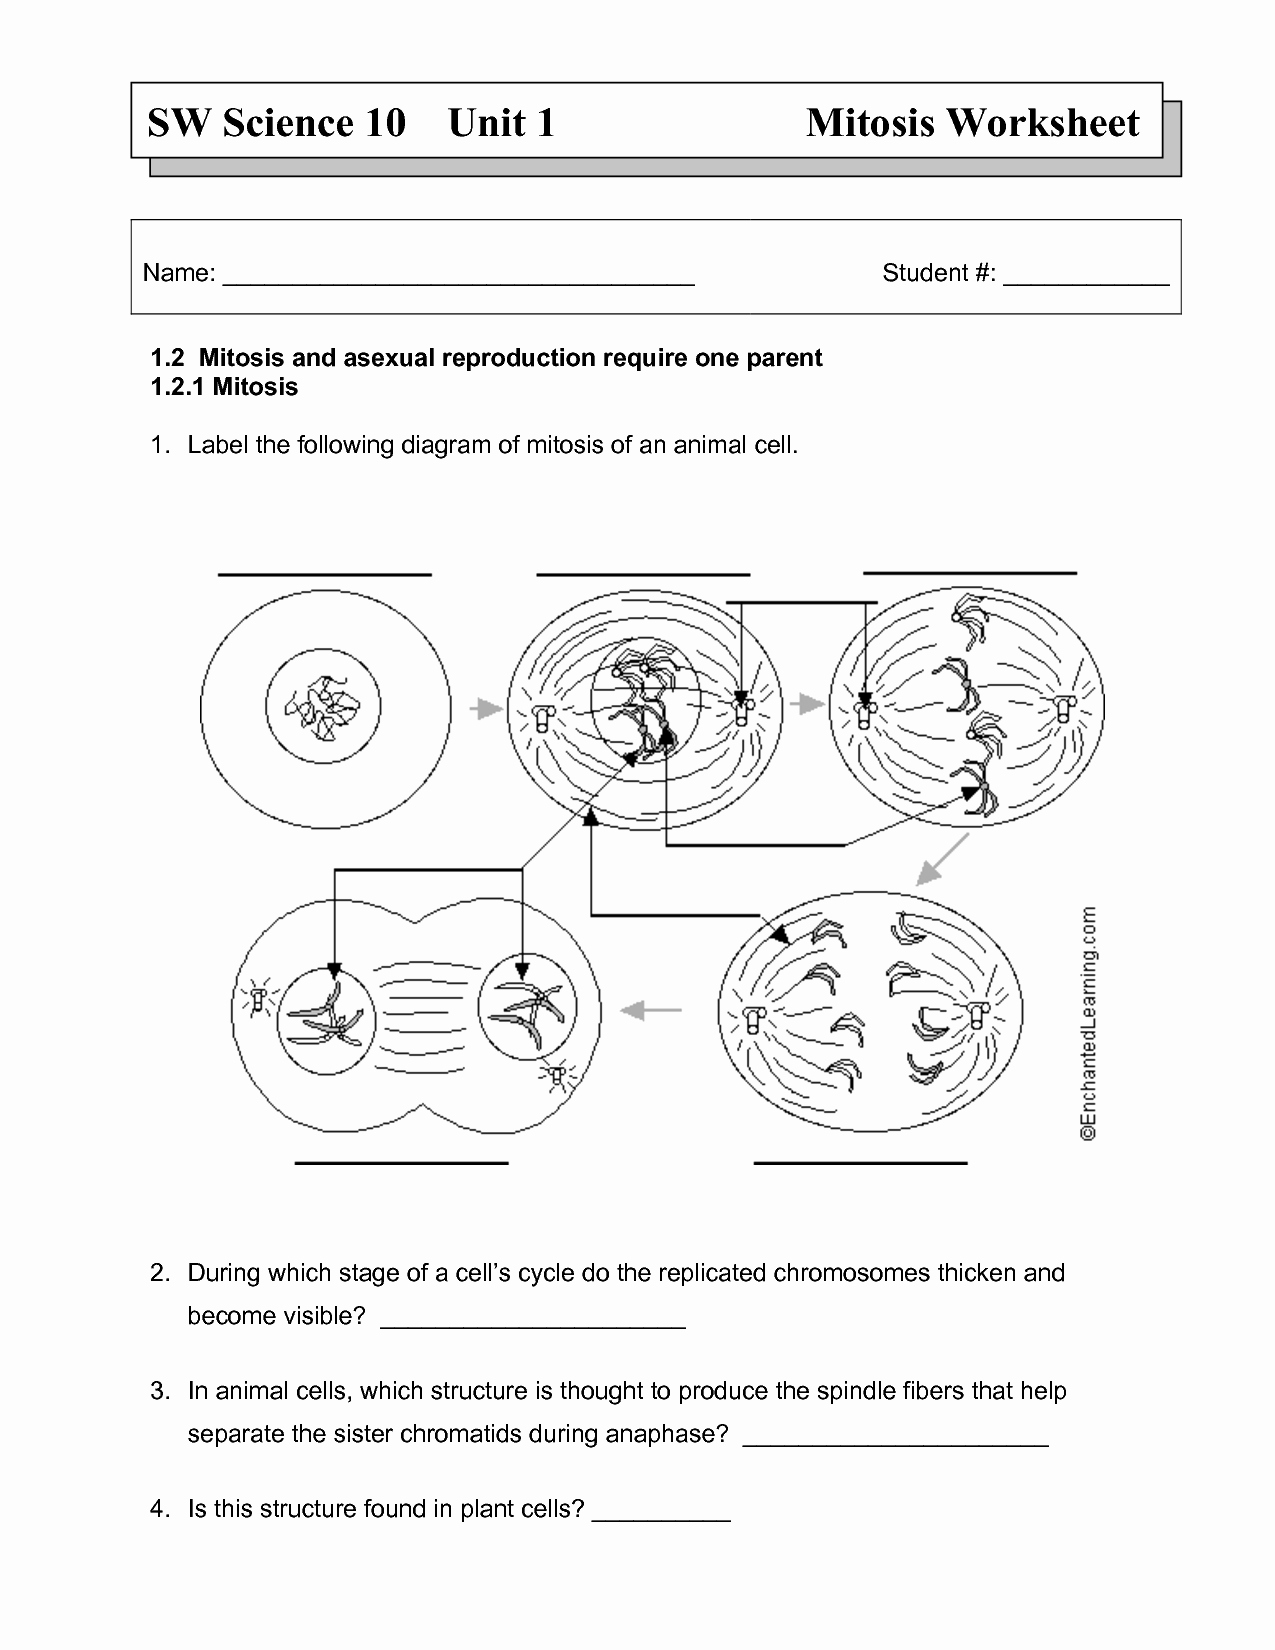 Onion Cell Mitosis Worksheet Answers Best Of 12 Best Of Cell Division Worksheet Mitosis Notes